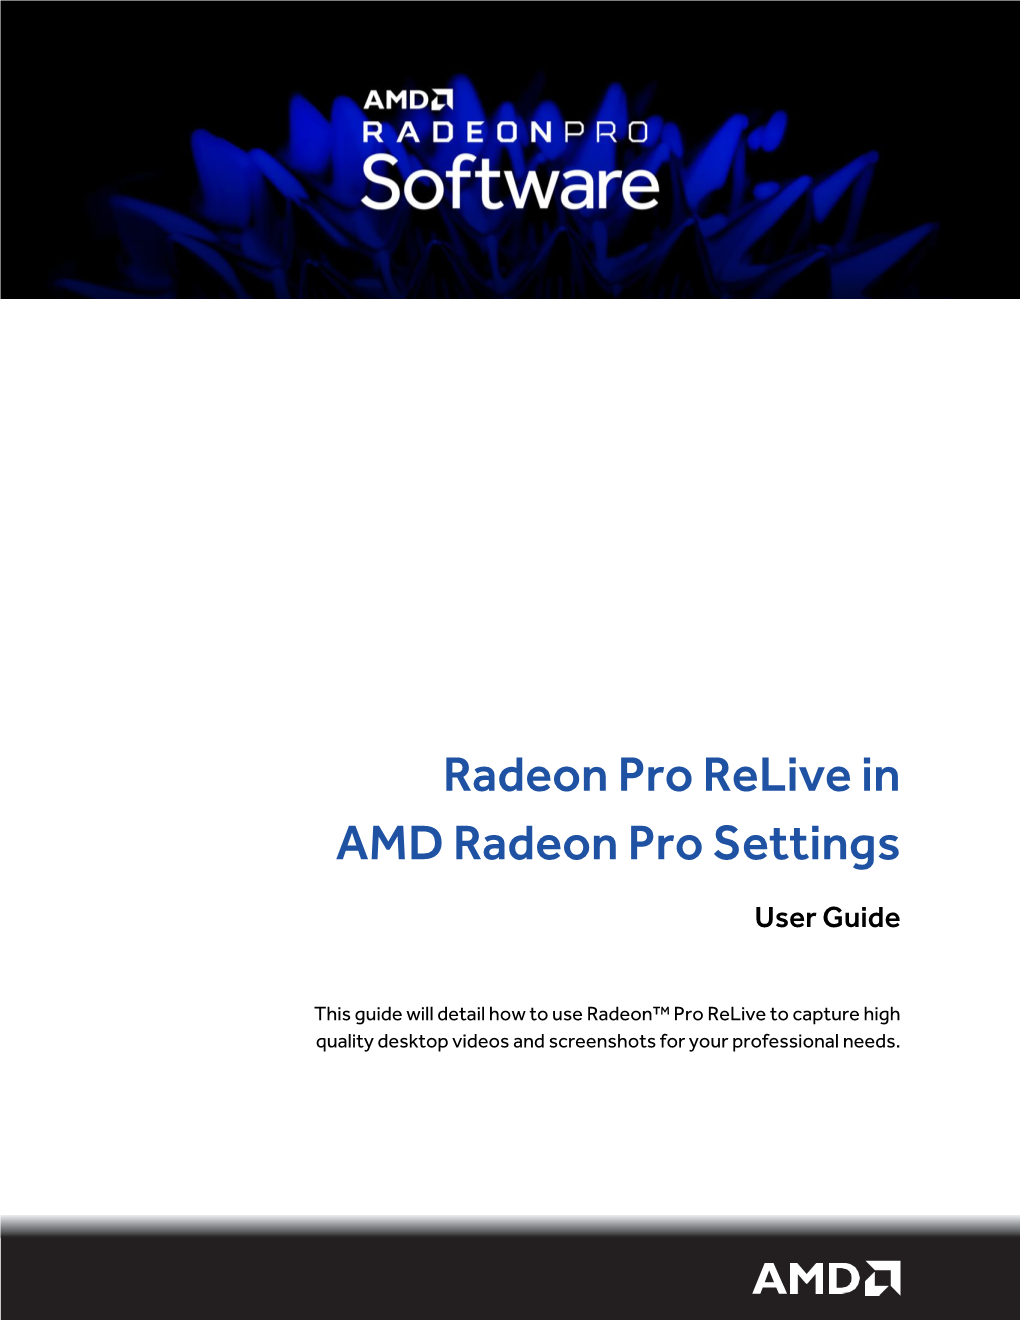 AMD Radeon Pro Relive User Guide